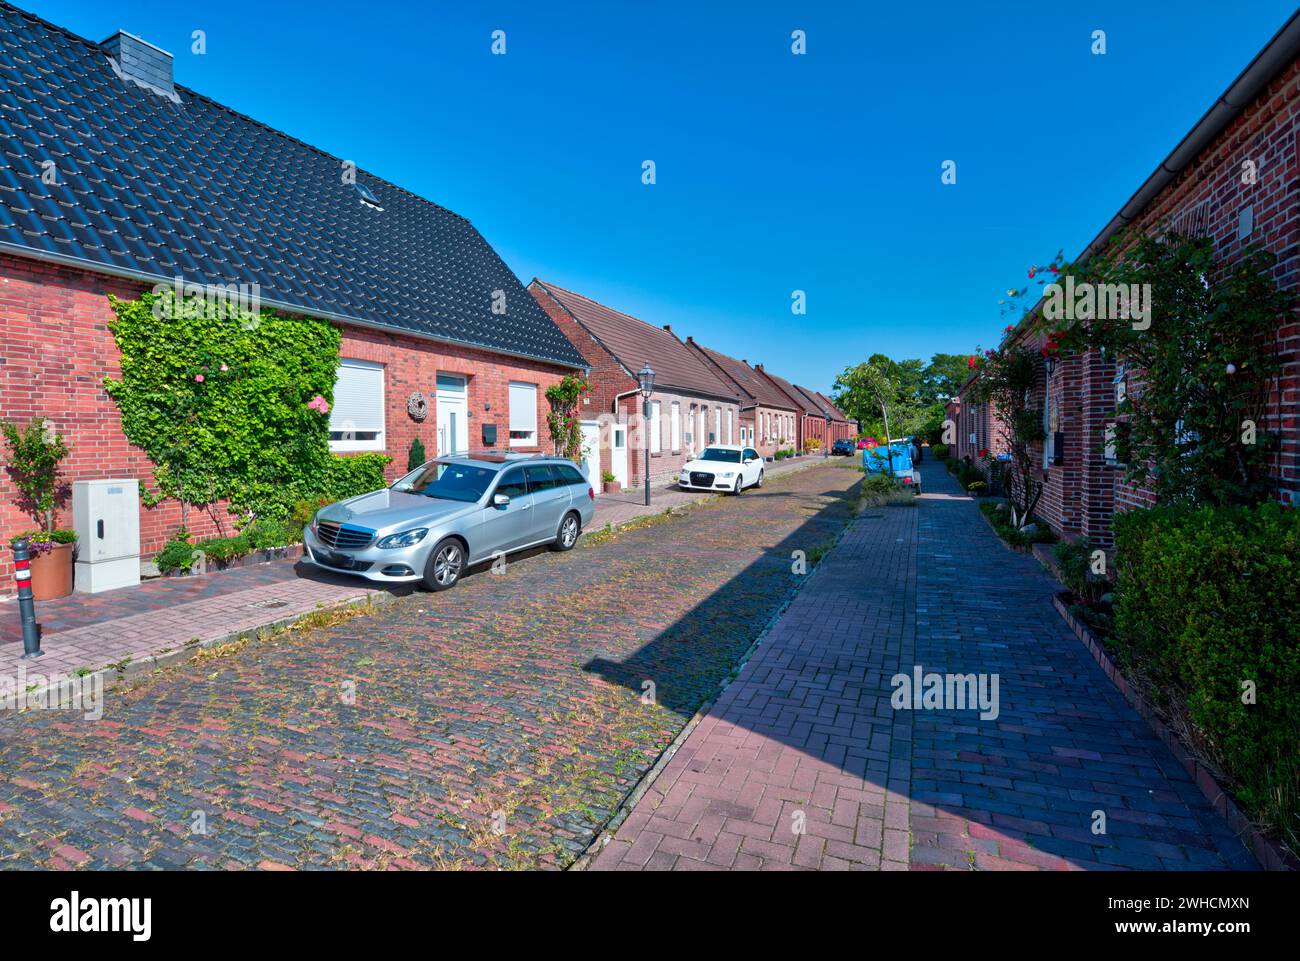 Shipyard workers' housing estate, house facade, architecture, town view, city tour, tourism, Wilhelmshaven, Lower Saxony, Germany, Stock Photo